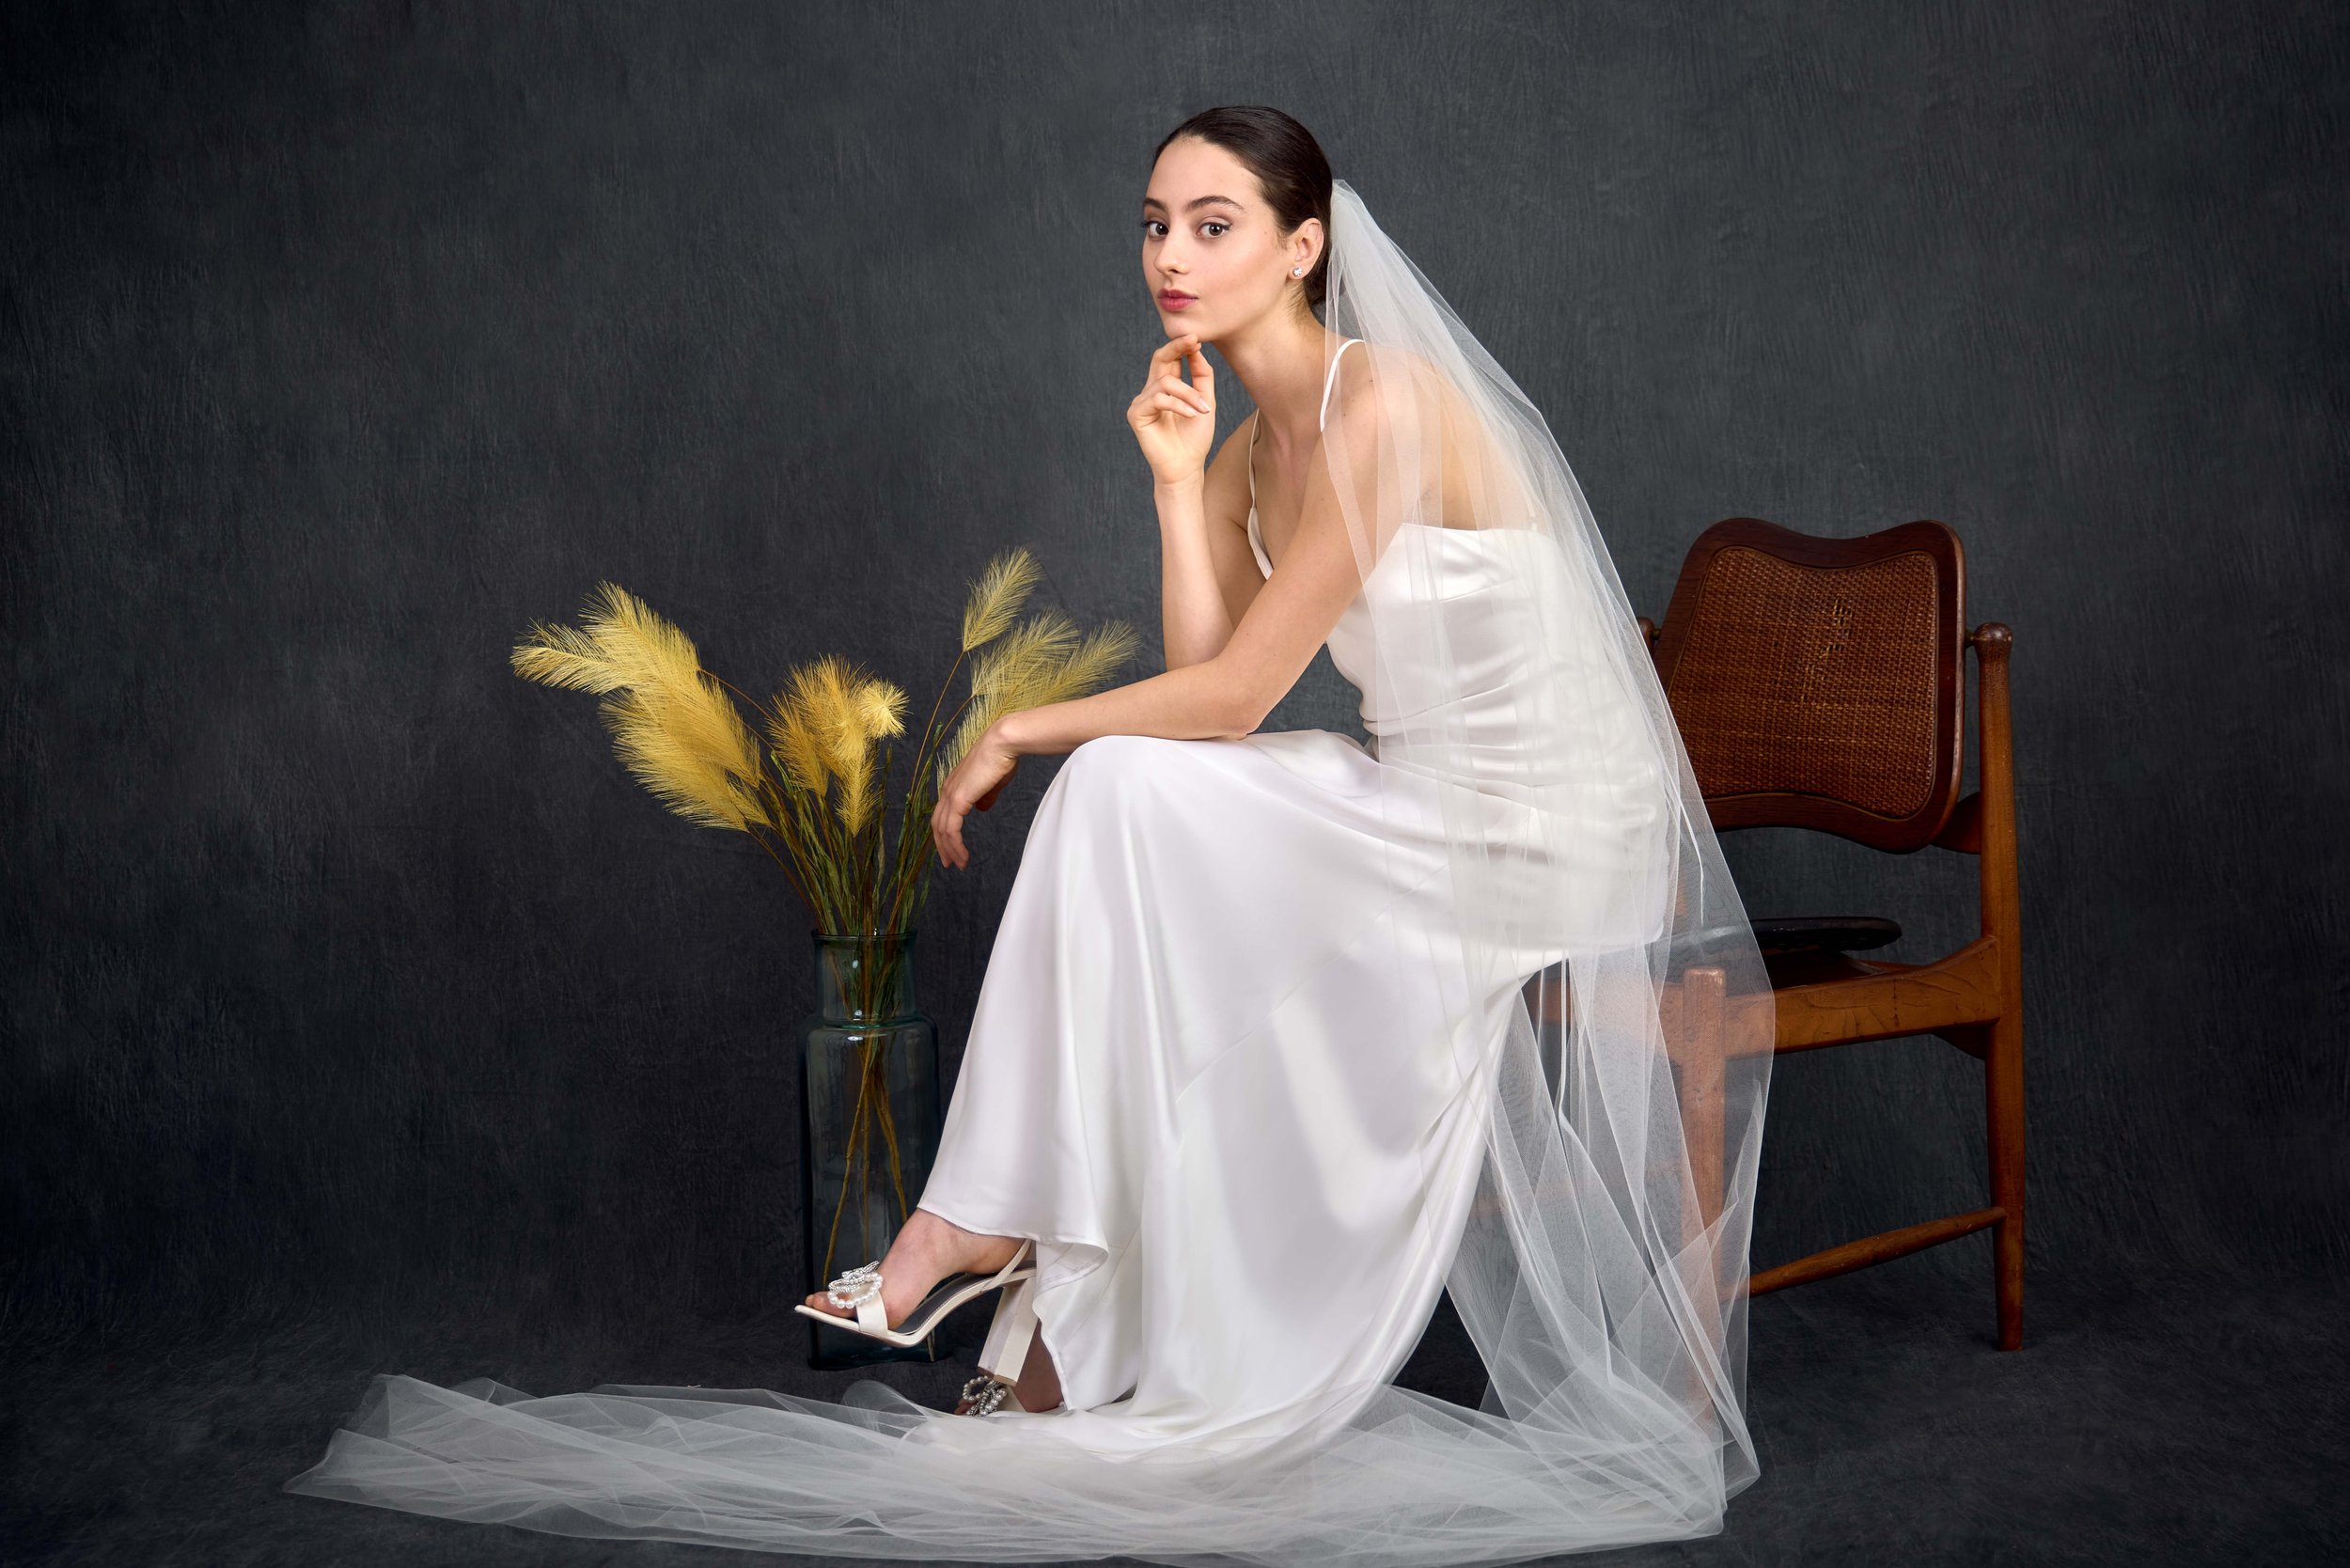 Olbye Women's Wedding Veil 108 Inch Cathedral Veil Single Tier 1T Long Veils  for Brides Soft Sheer Ivory Veil (Light Ivory) at  Women's Clothing  store